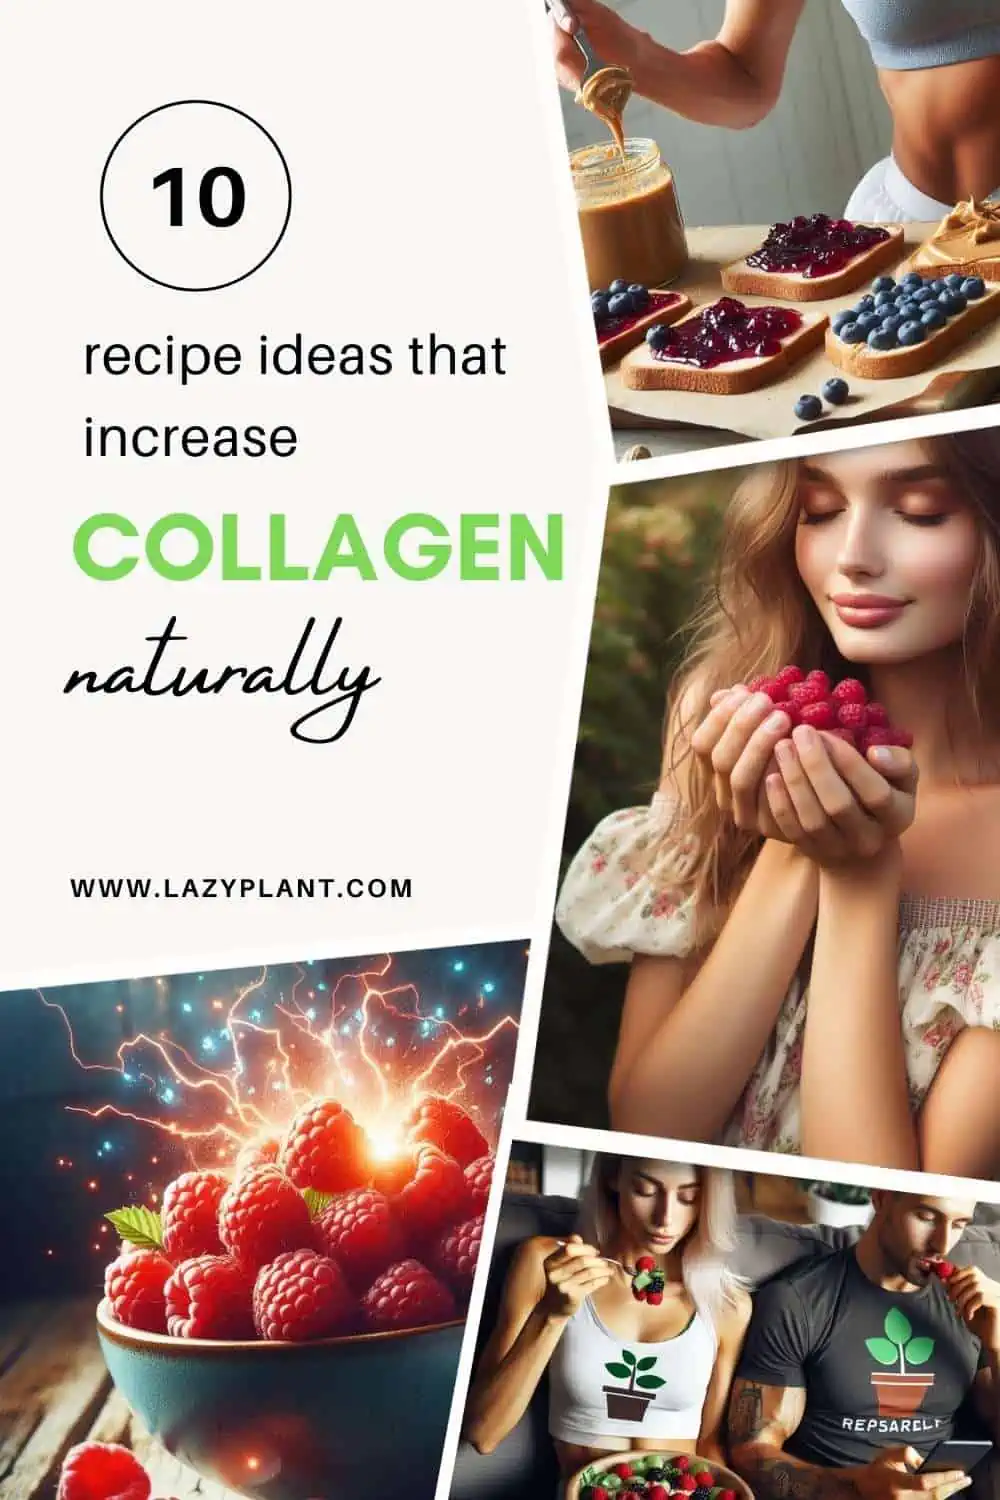 Meal Ideas high in Collagen.